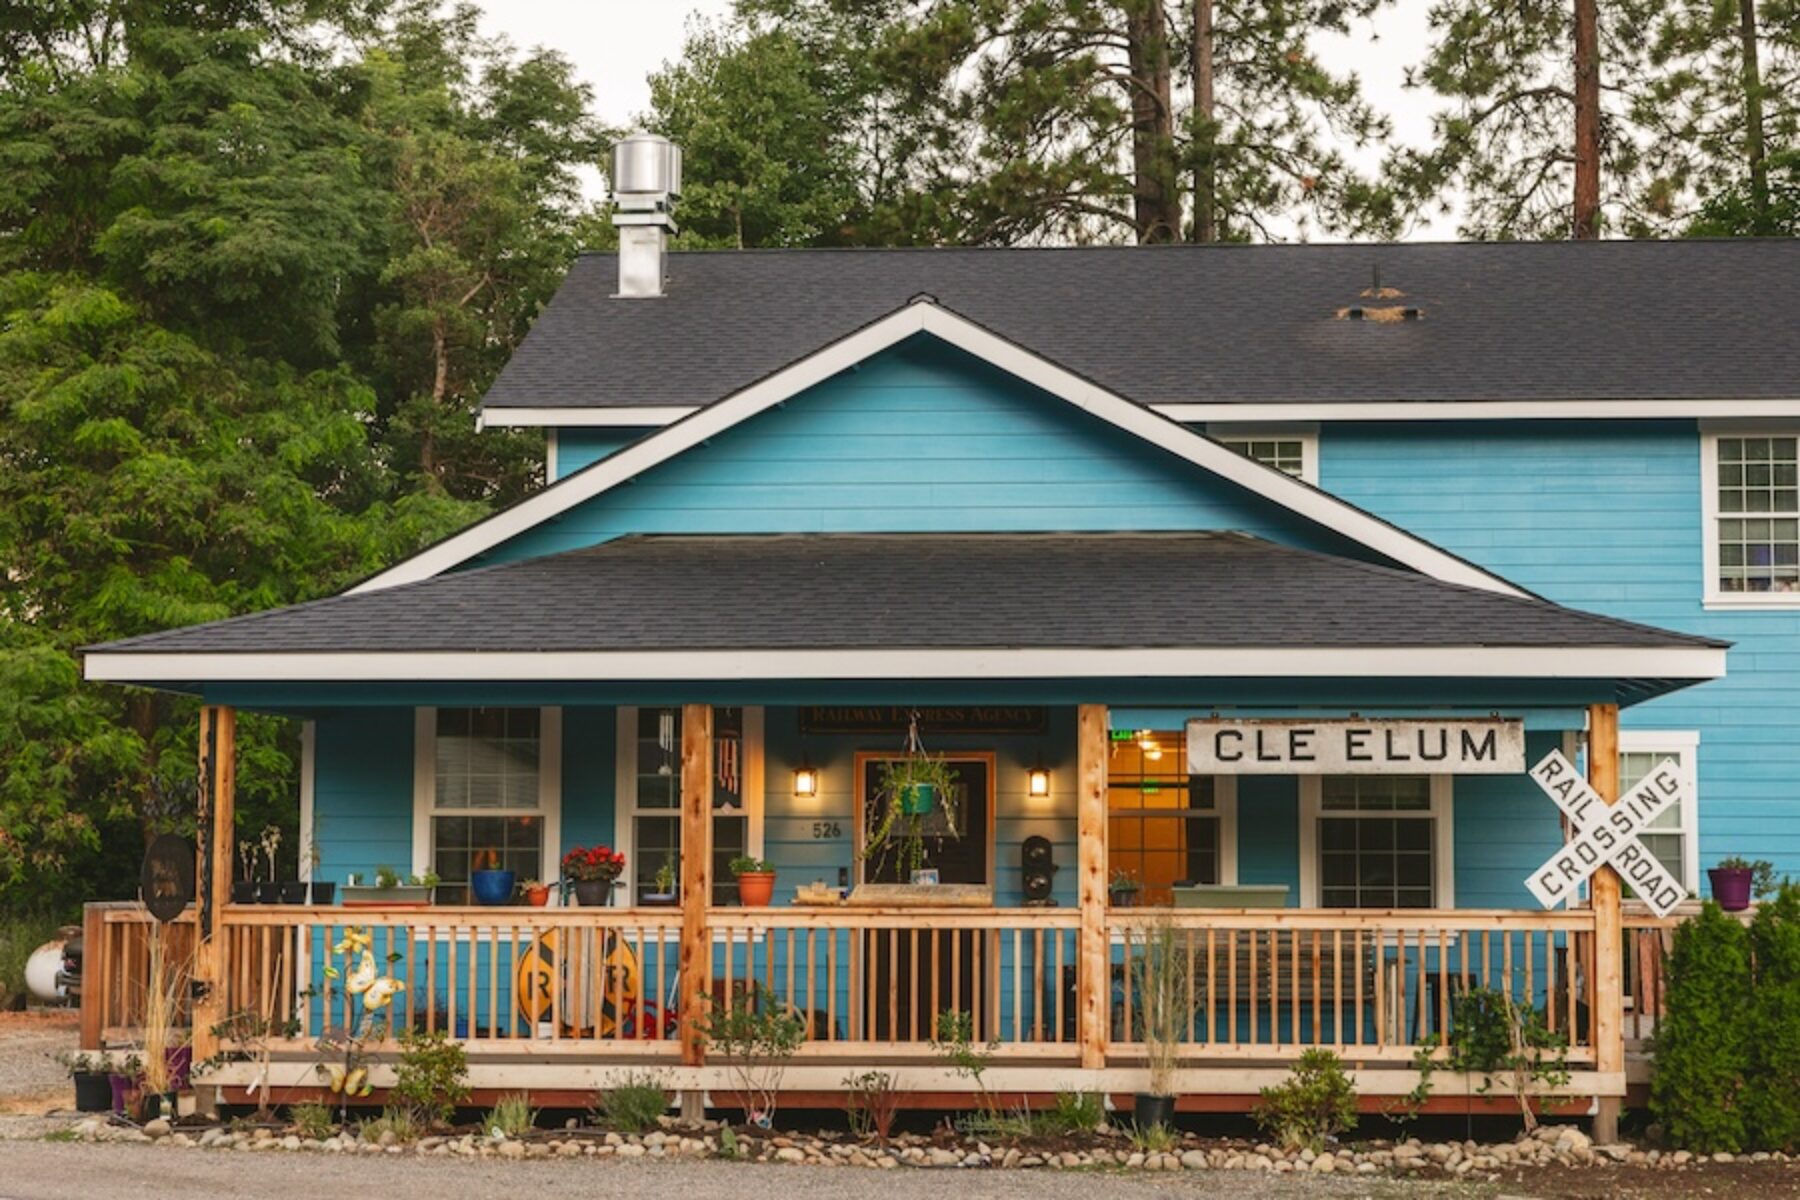 Washington's Iron Horse Inn Bed and Breakfast is located adjacent to the Cle Elum Depot along the Great American Rail-Trail | Photo courtesy Iron Horse Inn Bed and Breakfast